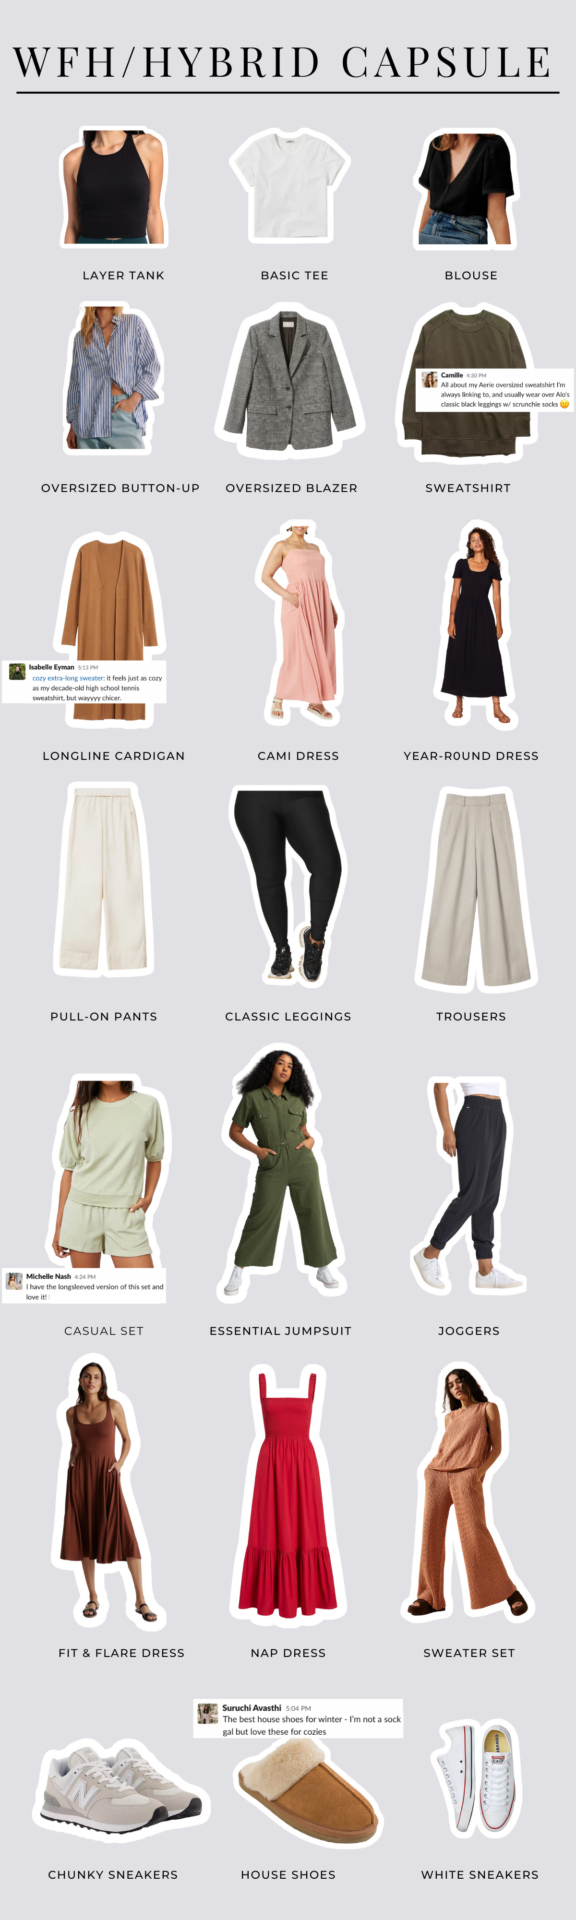 The Most Affordable Work From Home Wardrobe Essentials - The